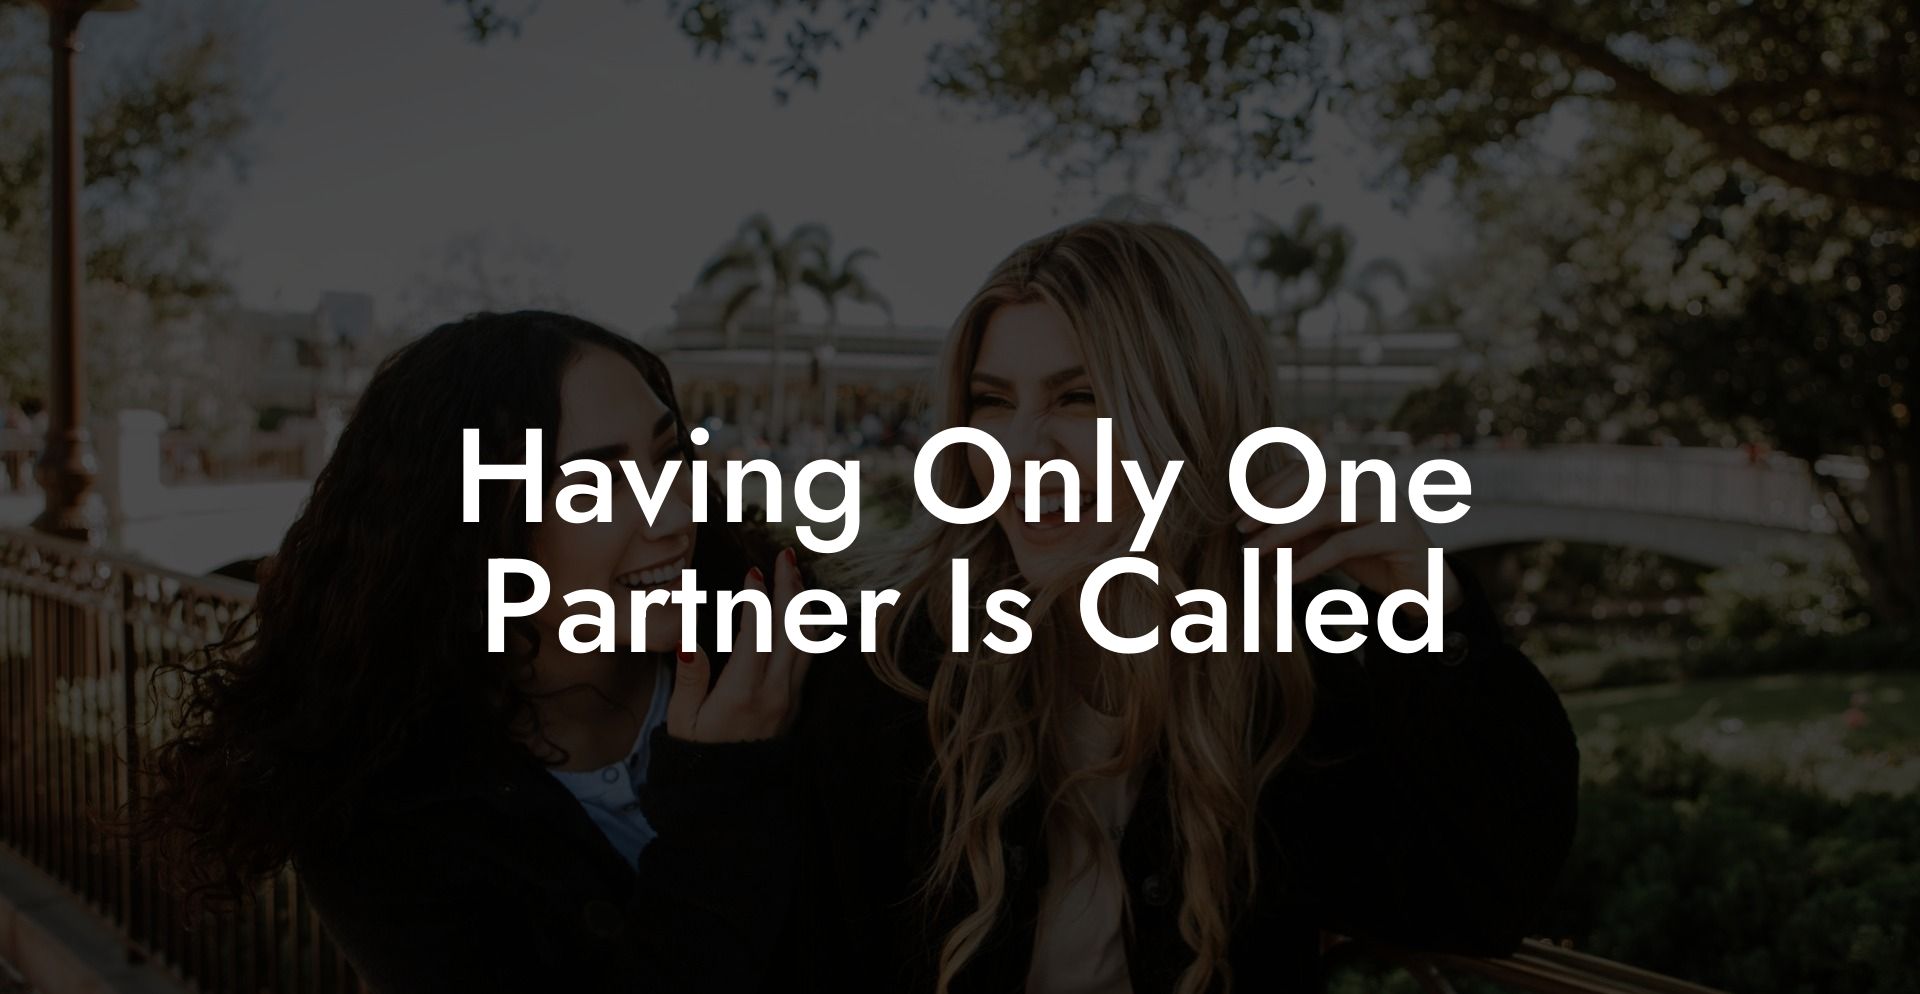 Having Only One Partner Is Called